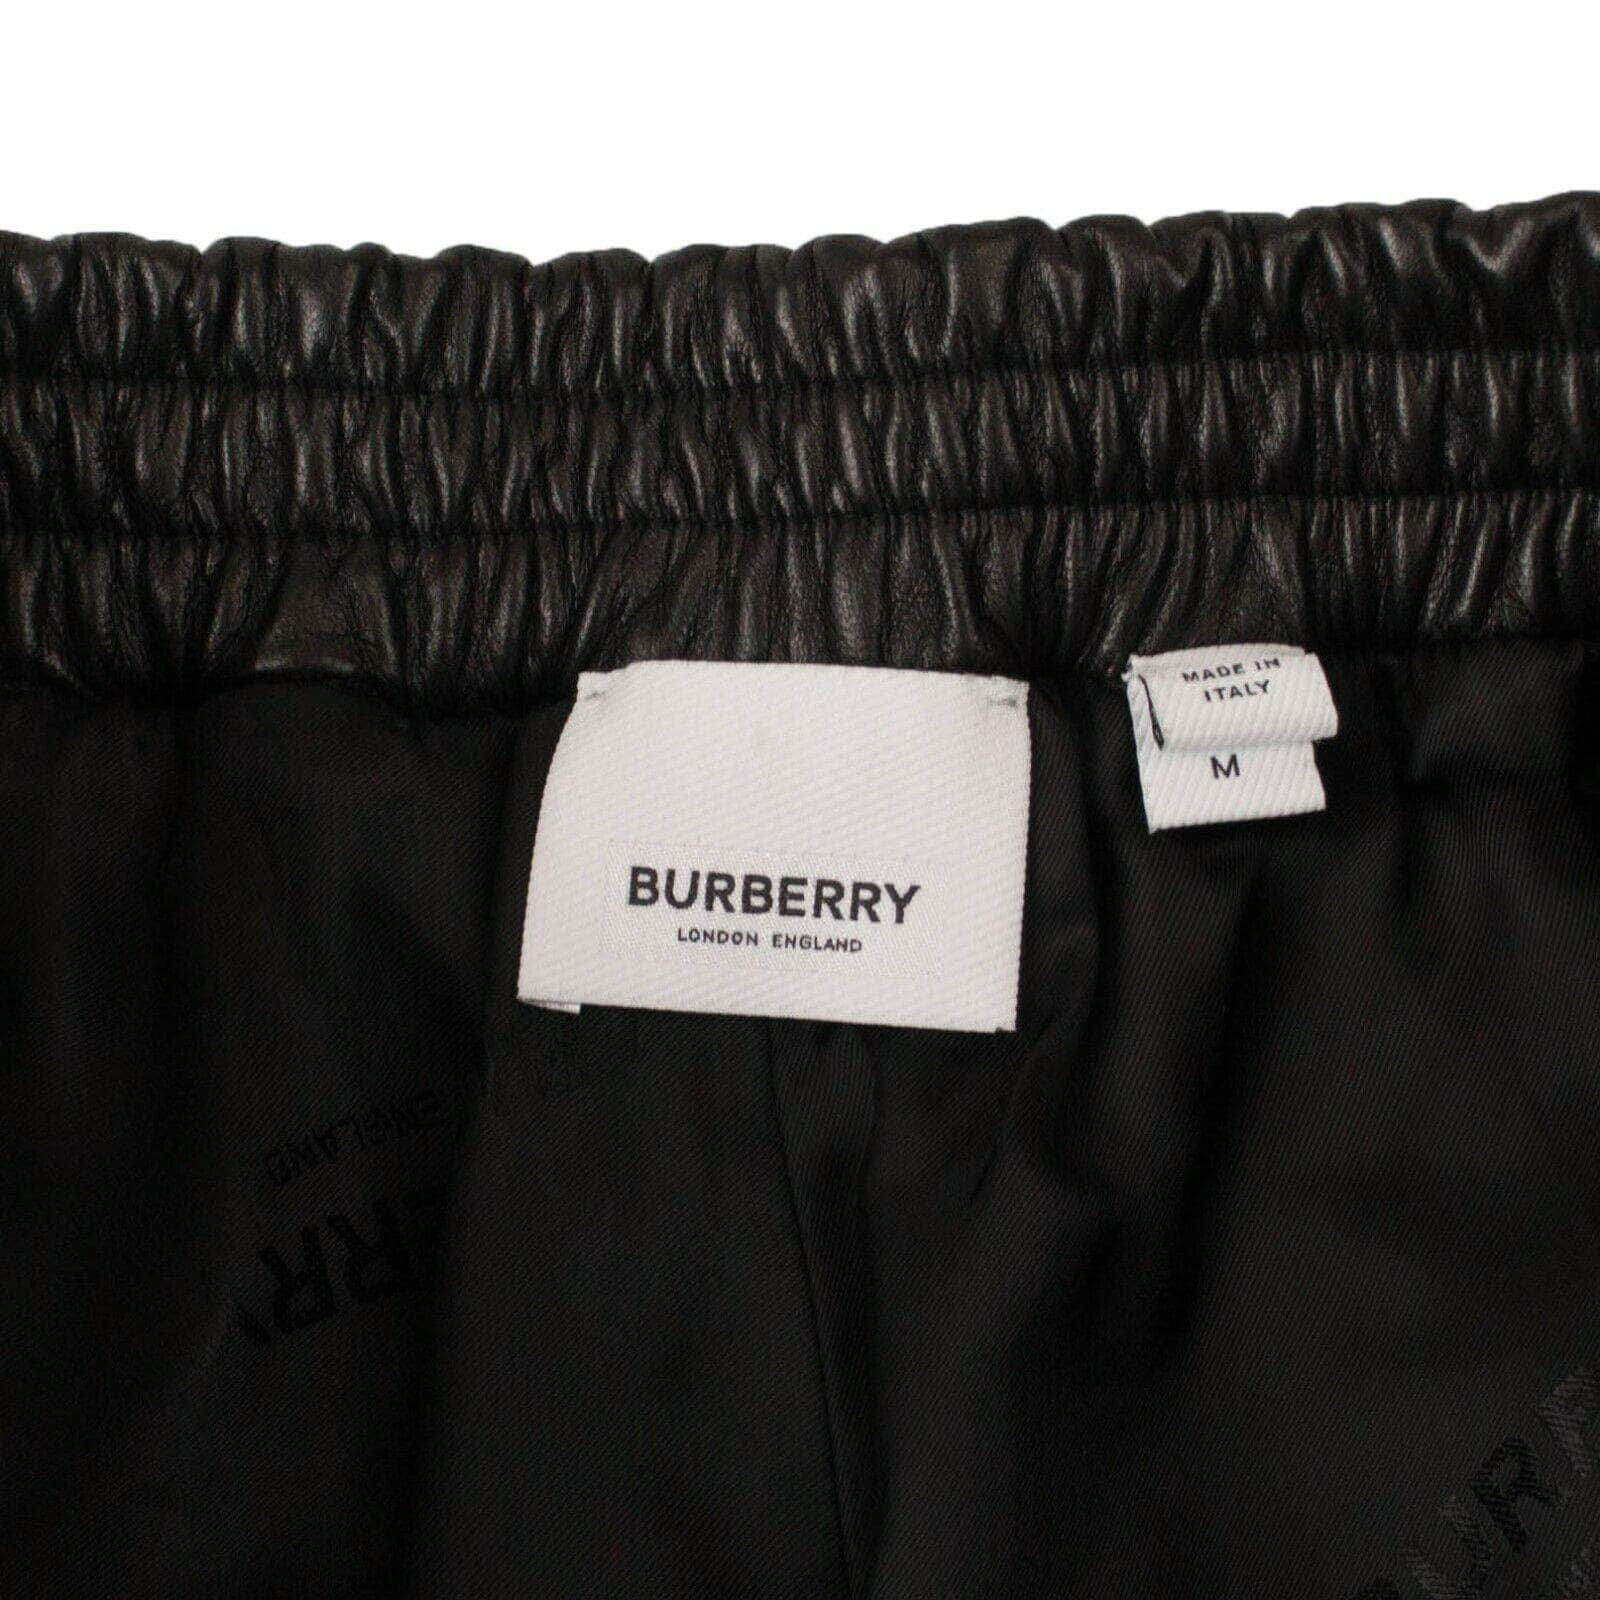 Burberry Black Leather Long Trousers